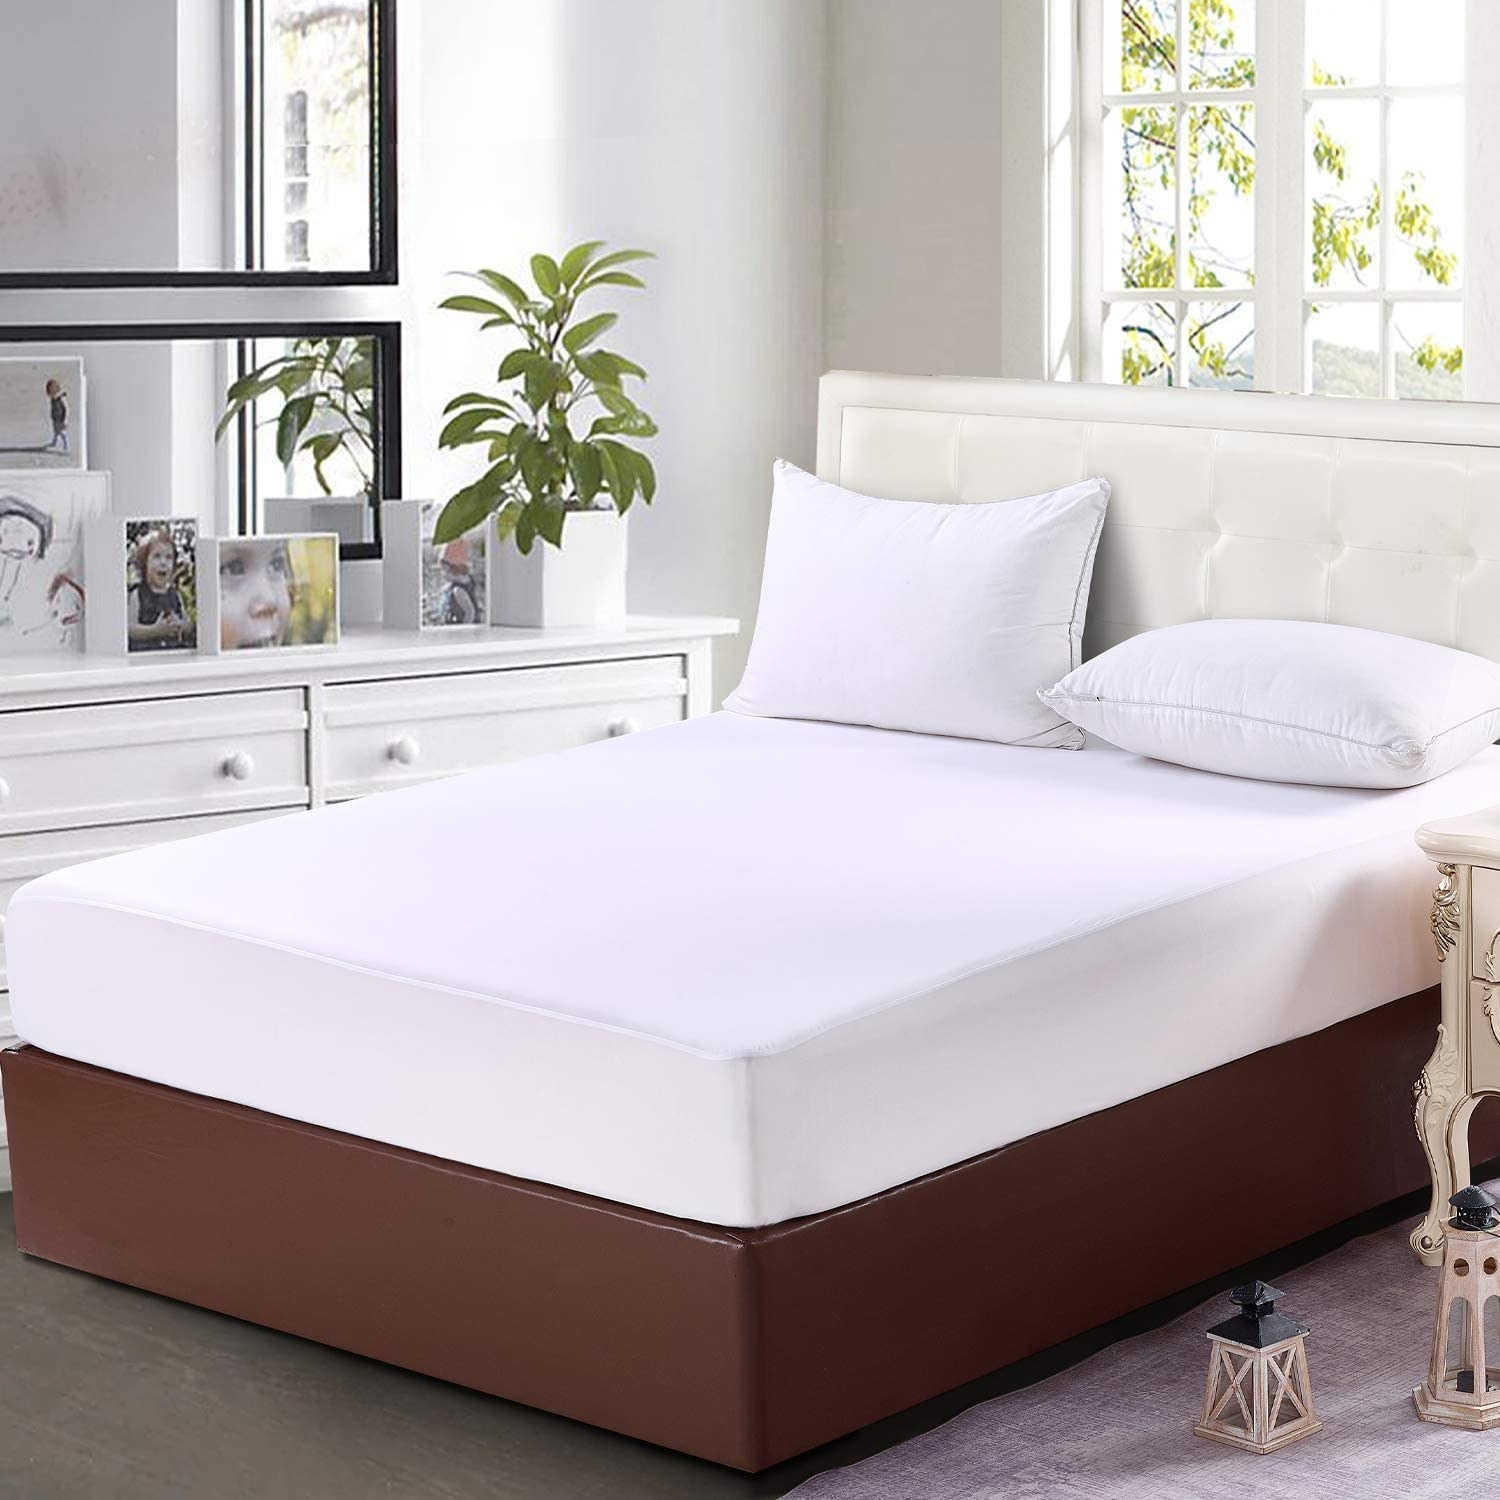 a mattress protector on a bed